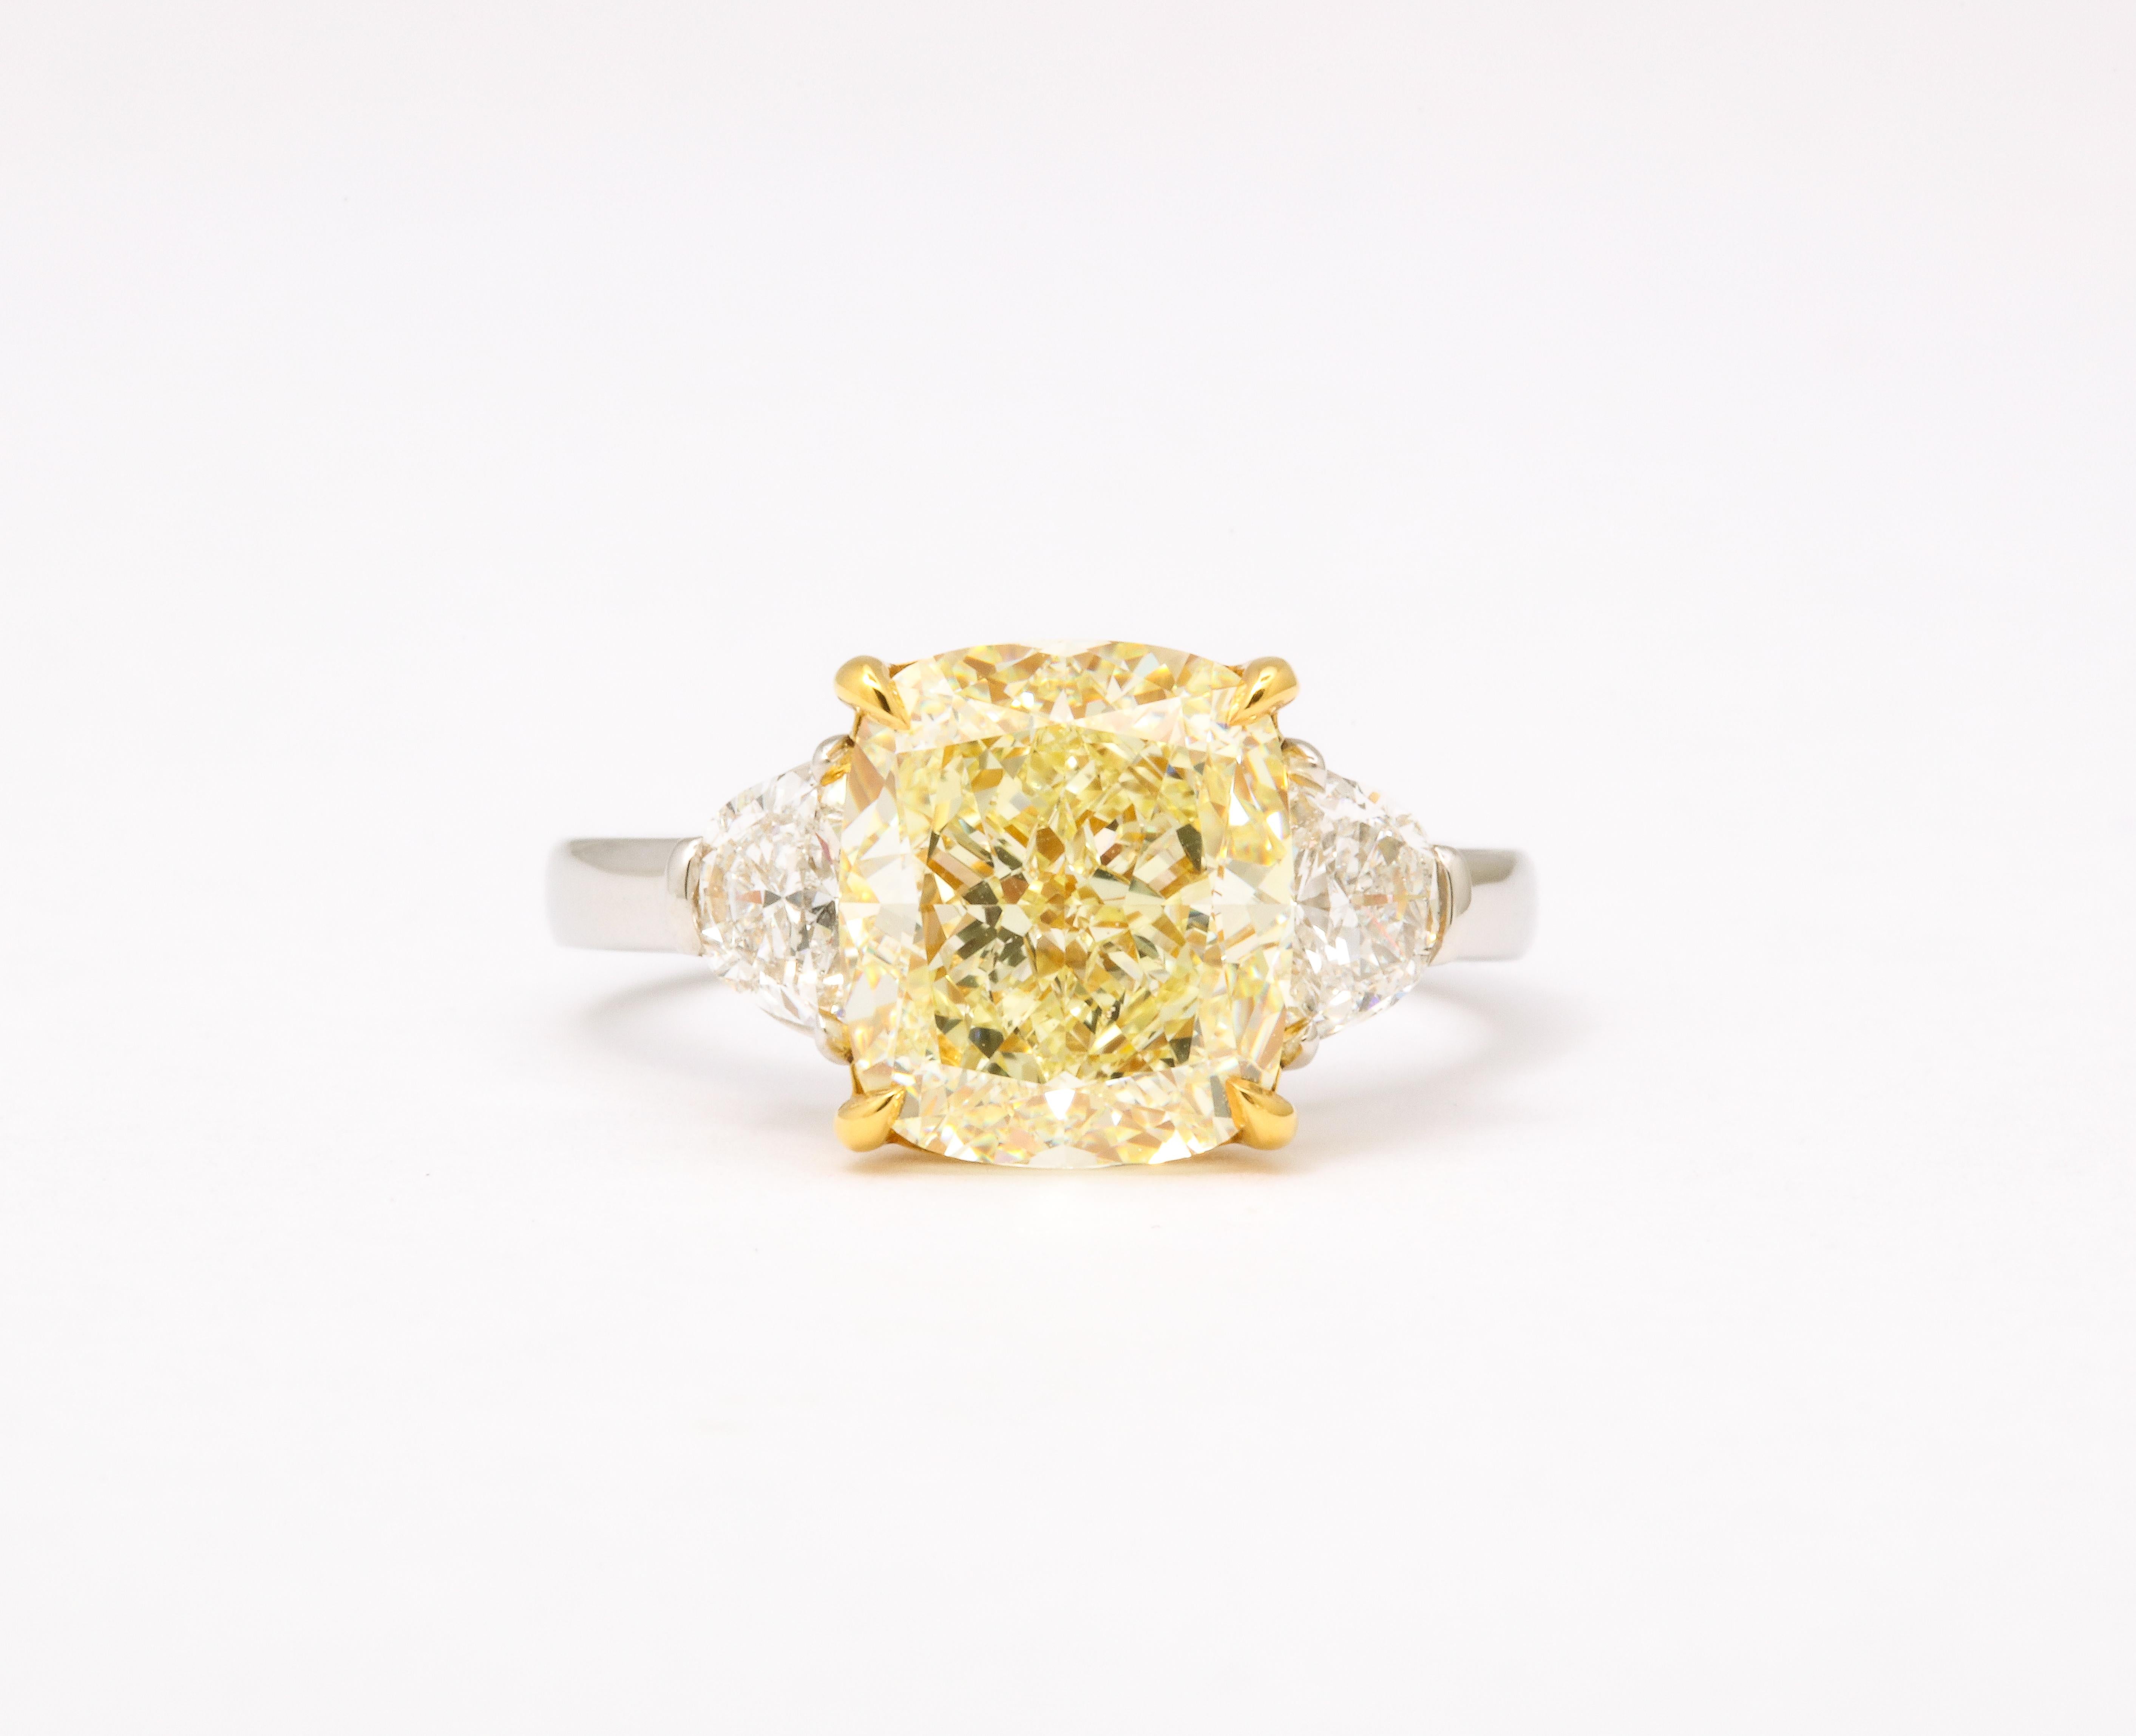 
GIA certified 5 carat Fancy Light Yellow, VS1 clarity Cushion cut center diamond. 

.70 carats of white side diamonds. 

Set in a custom platinum and 18k yellow gold mounting. 

Size 6.25, this ring can easily be sized. 